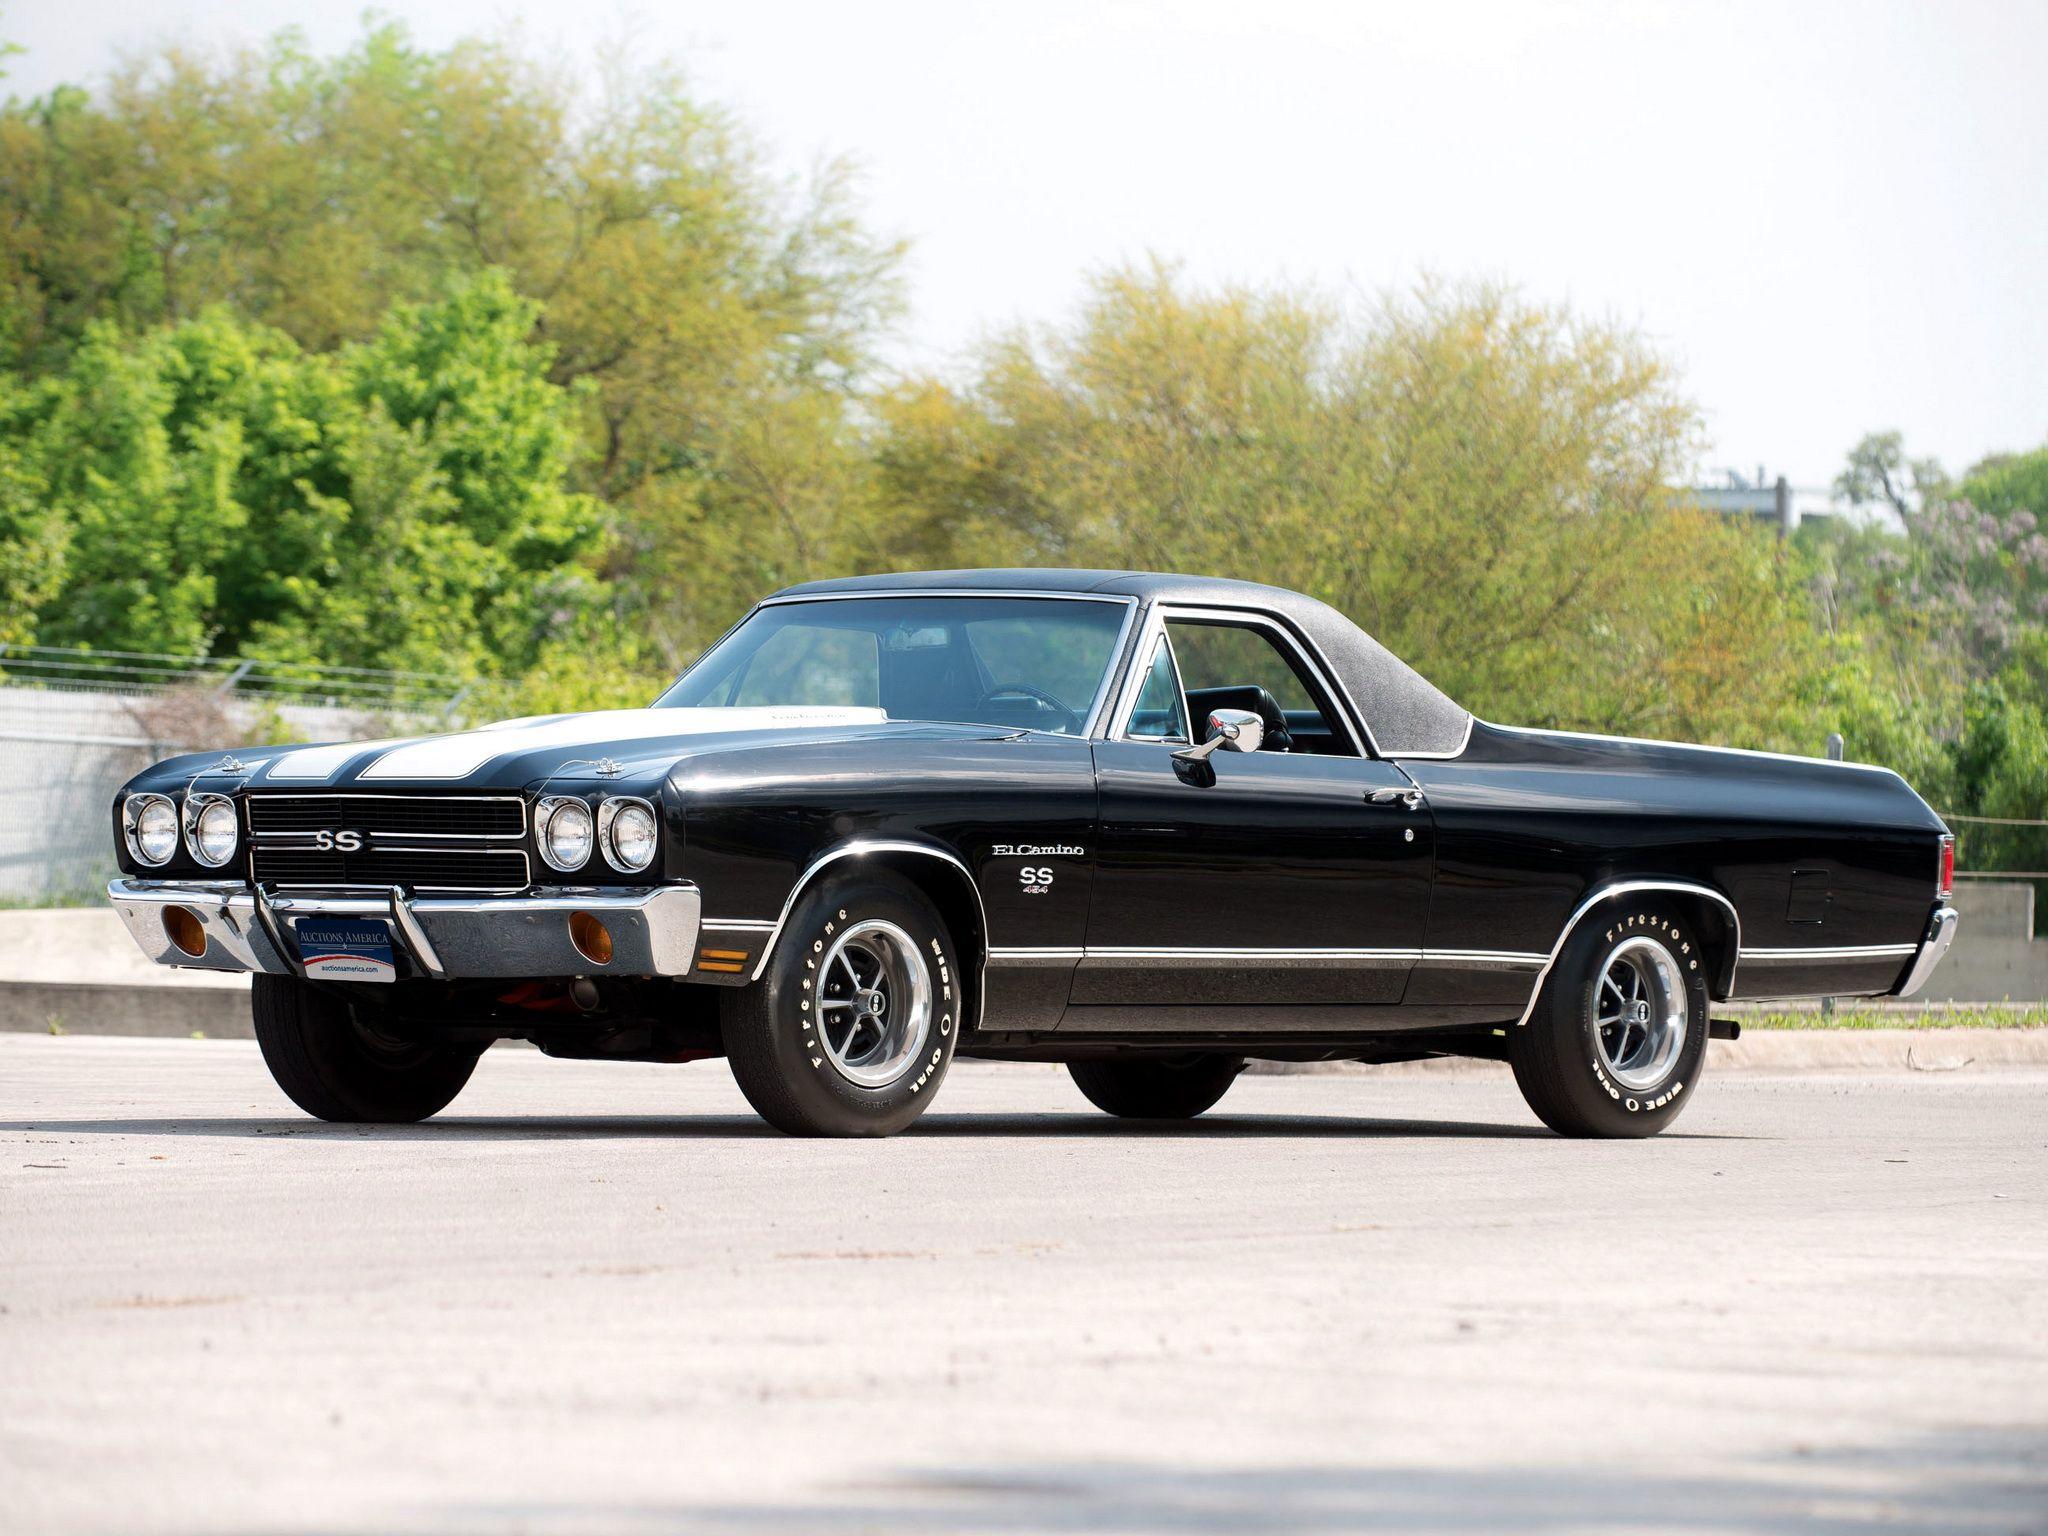 Chevrolet El Camino Wallpapers 2K Photos, Wallpapers and other Wallpaper